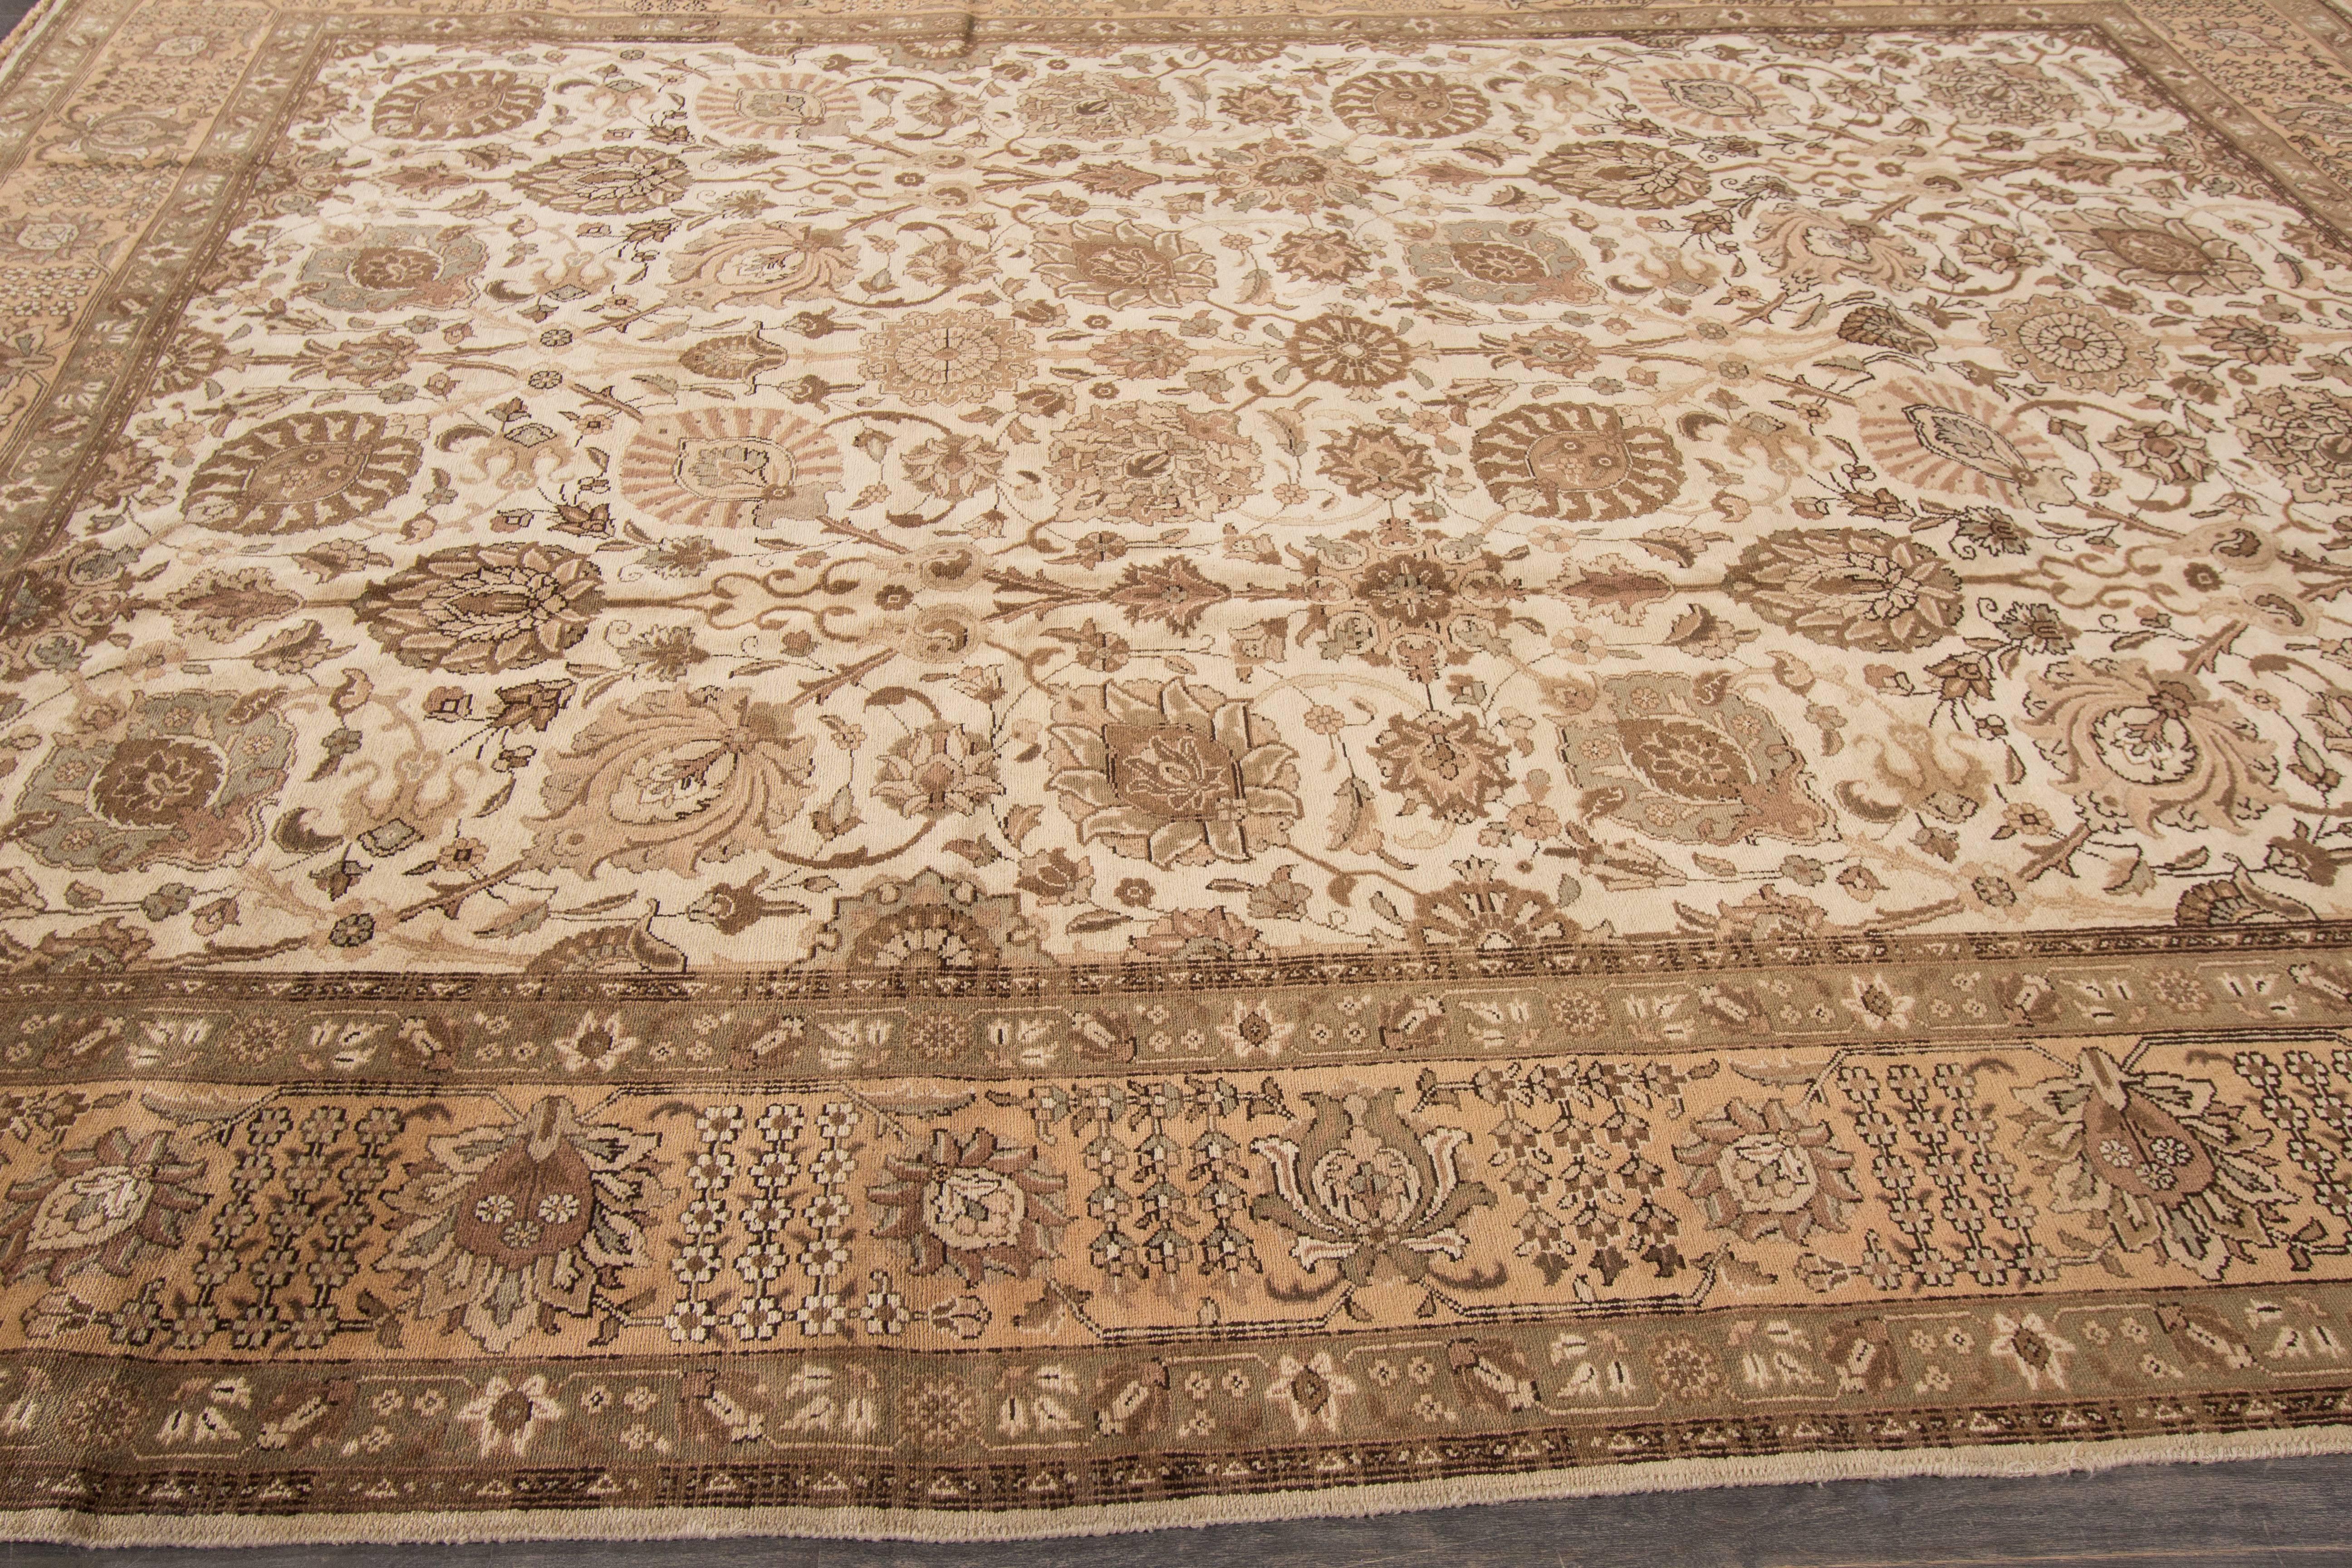 A hand-knotted antique Tabriz rug with a floral design on a beige field. Accents of brown and ivory throughout. The size of this piece is 9'.8 x 12'.9.